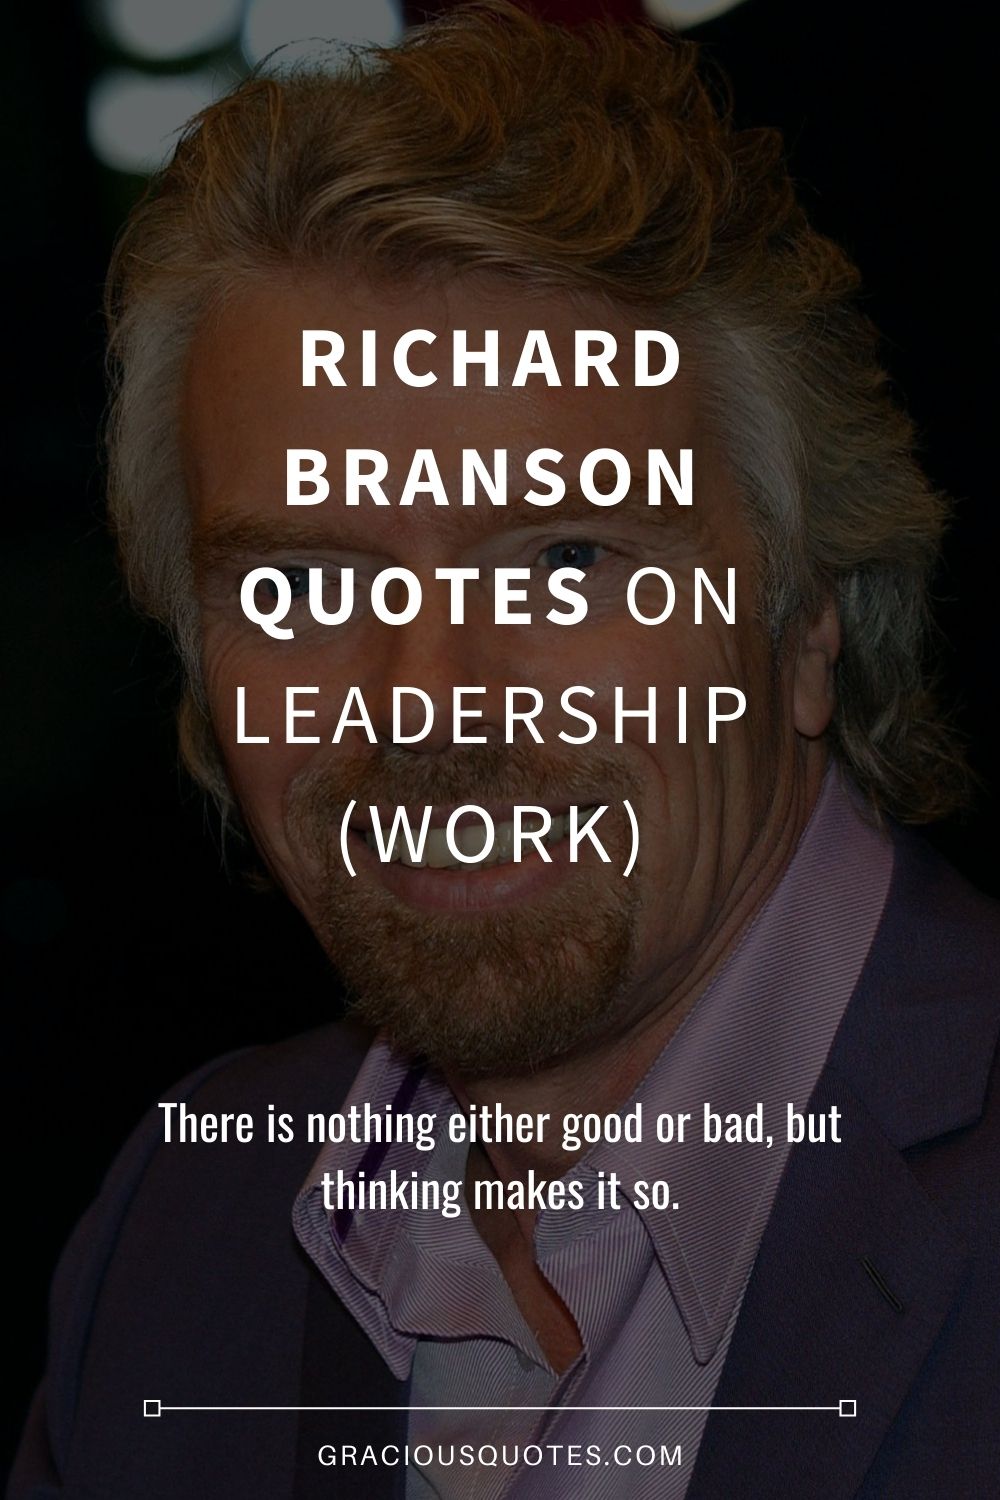 Richard Branson Quotes on Leadership (WORK) - Gracious Quotes